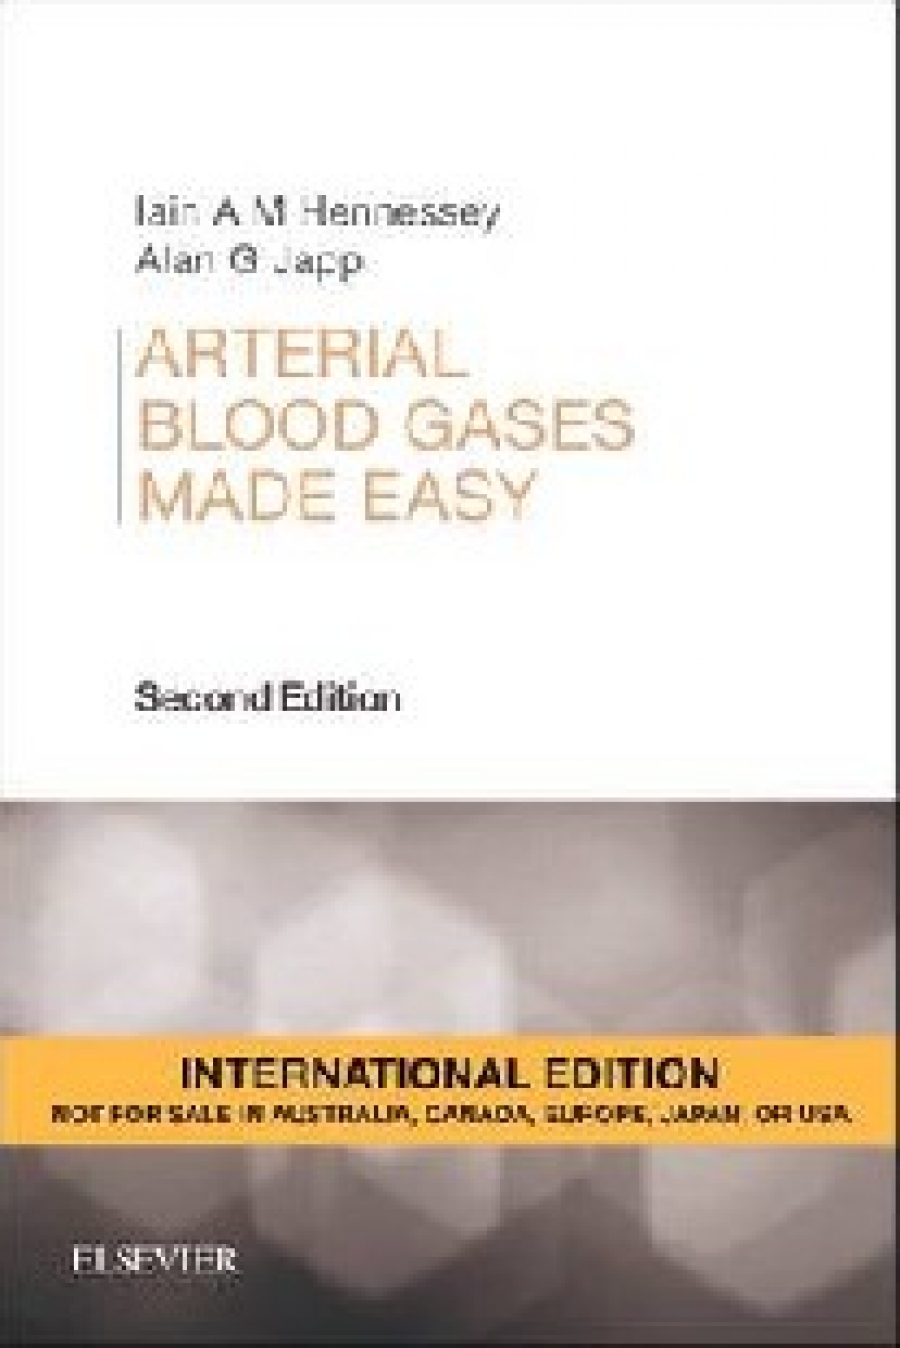 Iain, Hennessey Arterial Blood Gases Made Easy, International Edition 